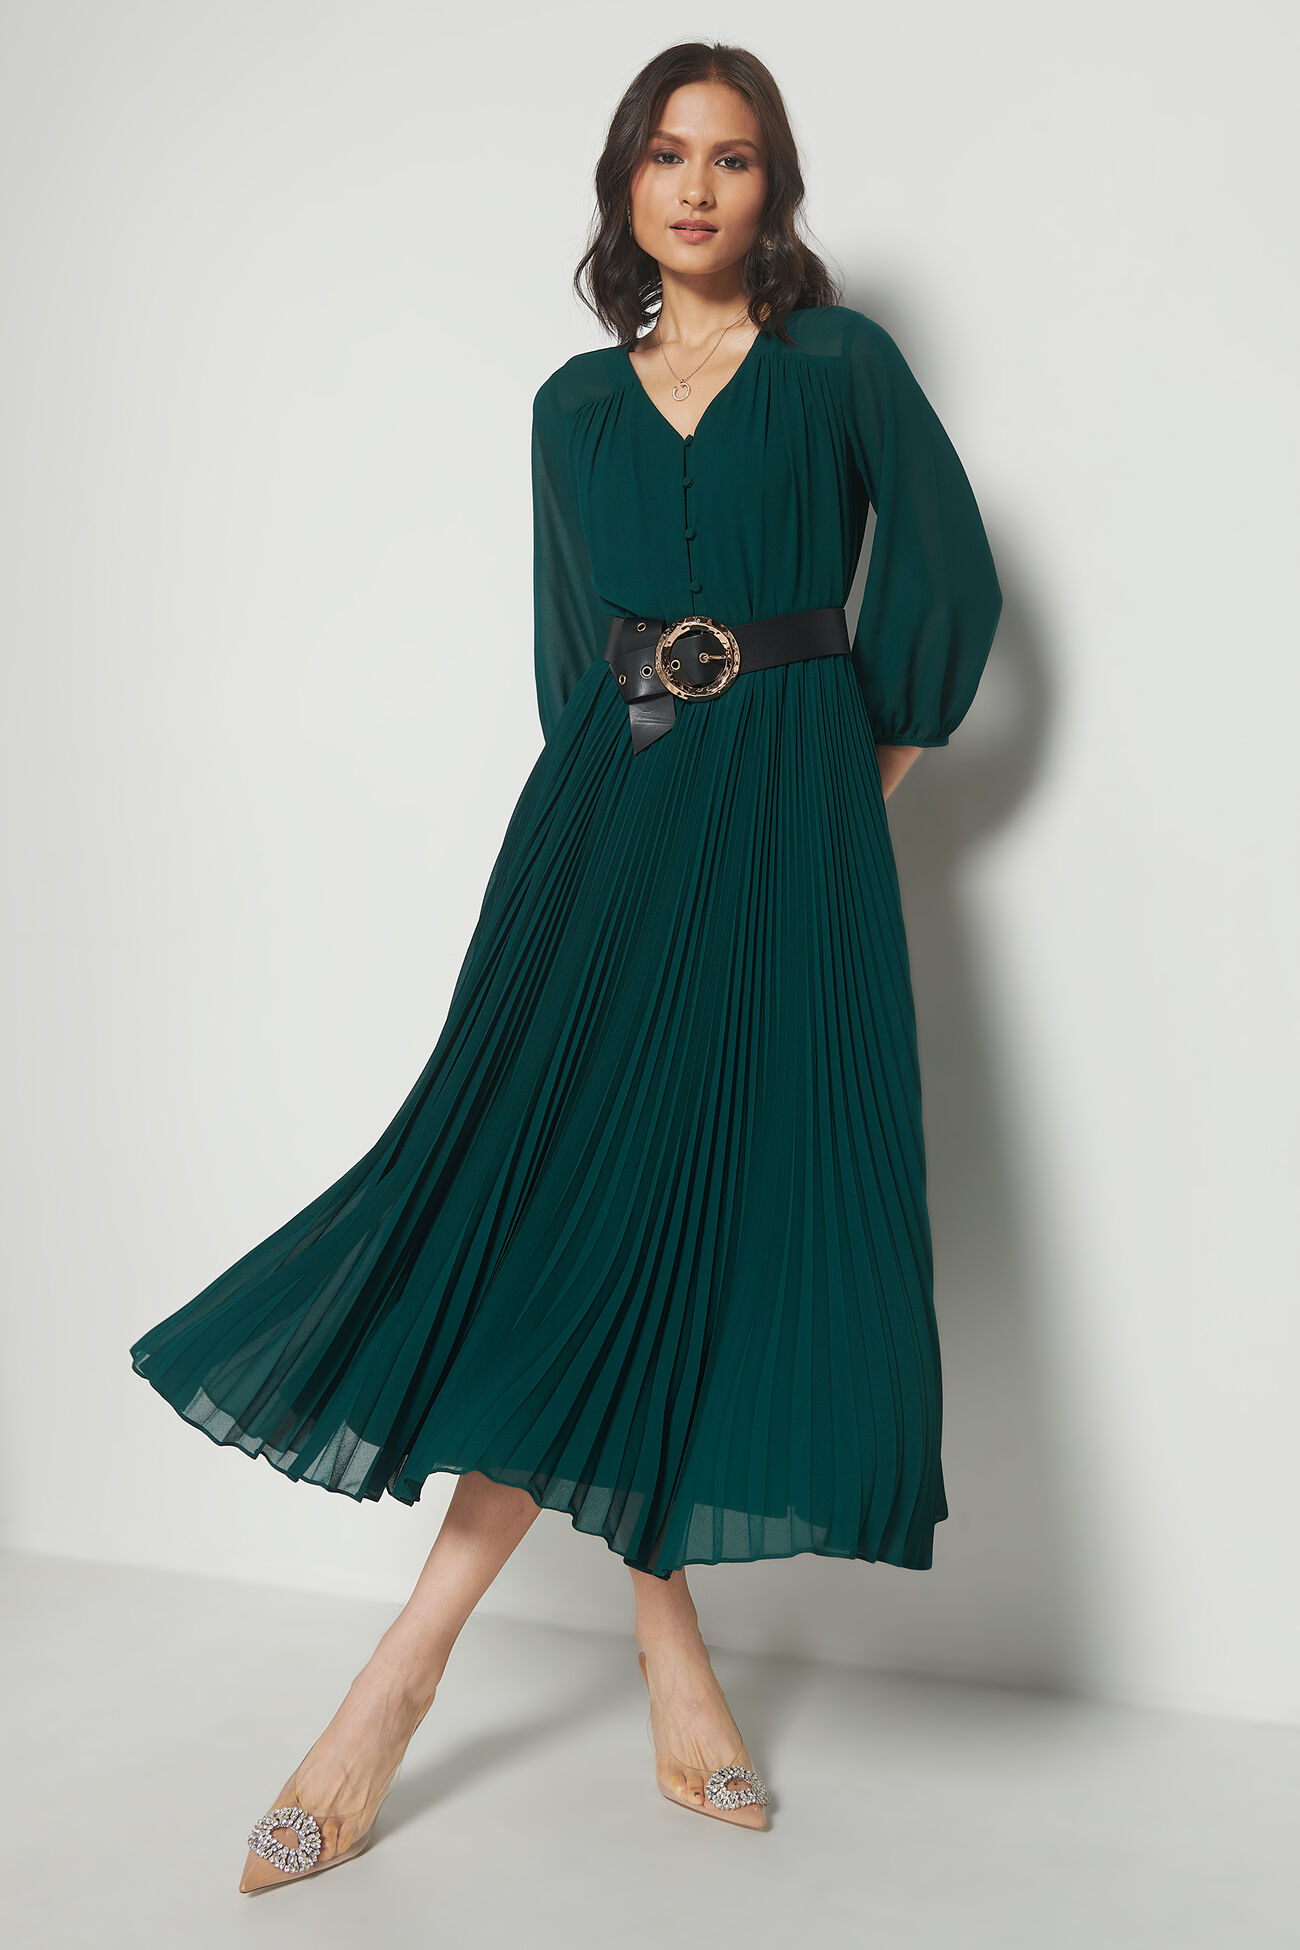 Aubergine Solid Flared Dress, Green, image 4